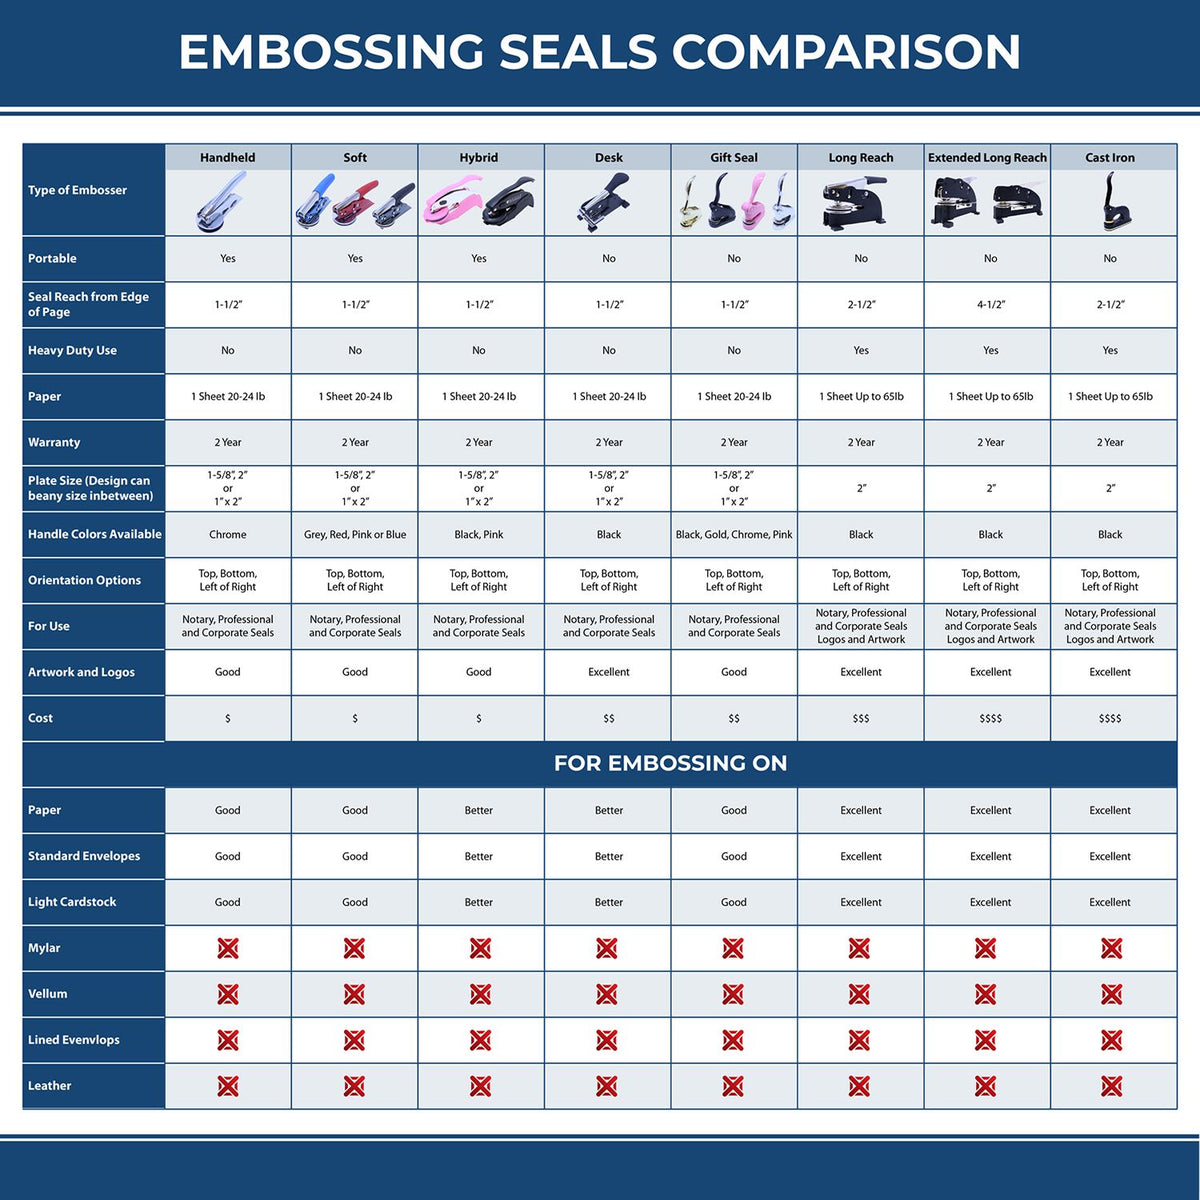 A comparison chart for the different types of mount models available for the Long Reach Guam Land Surveyor Seal.